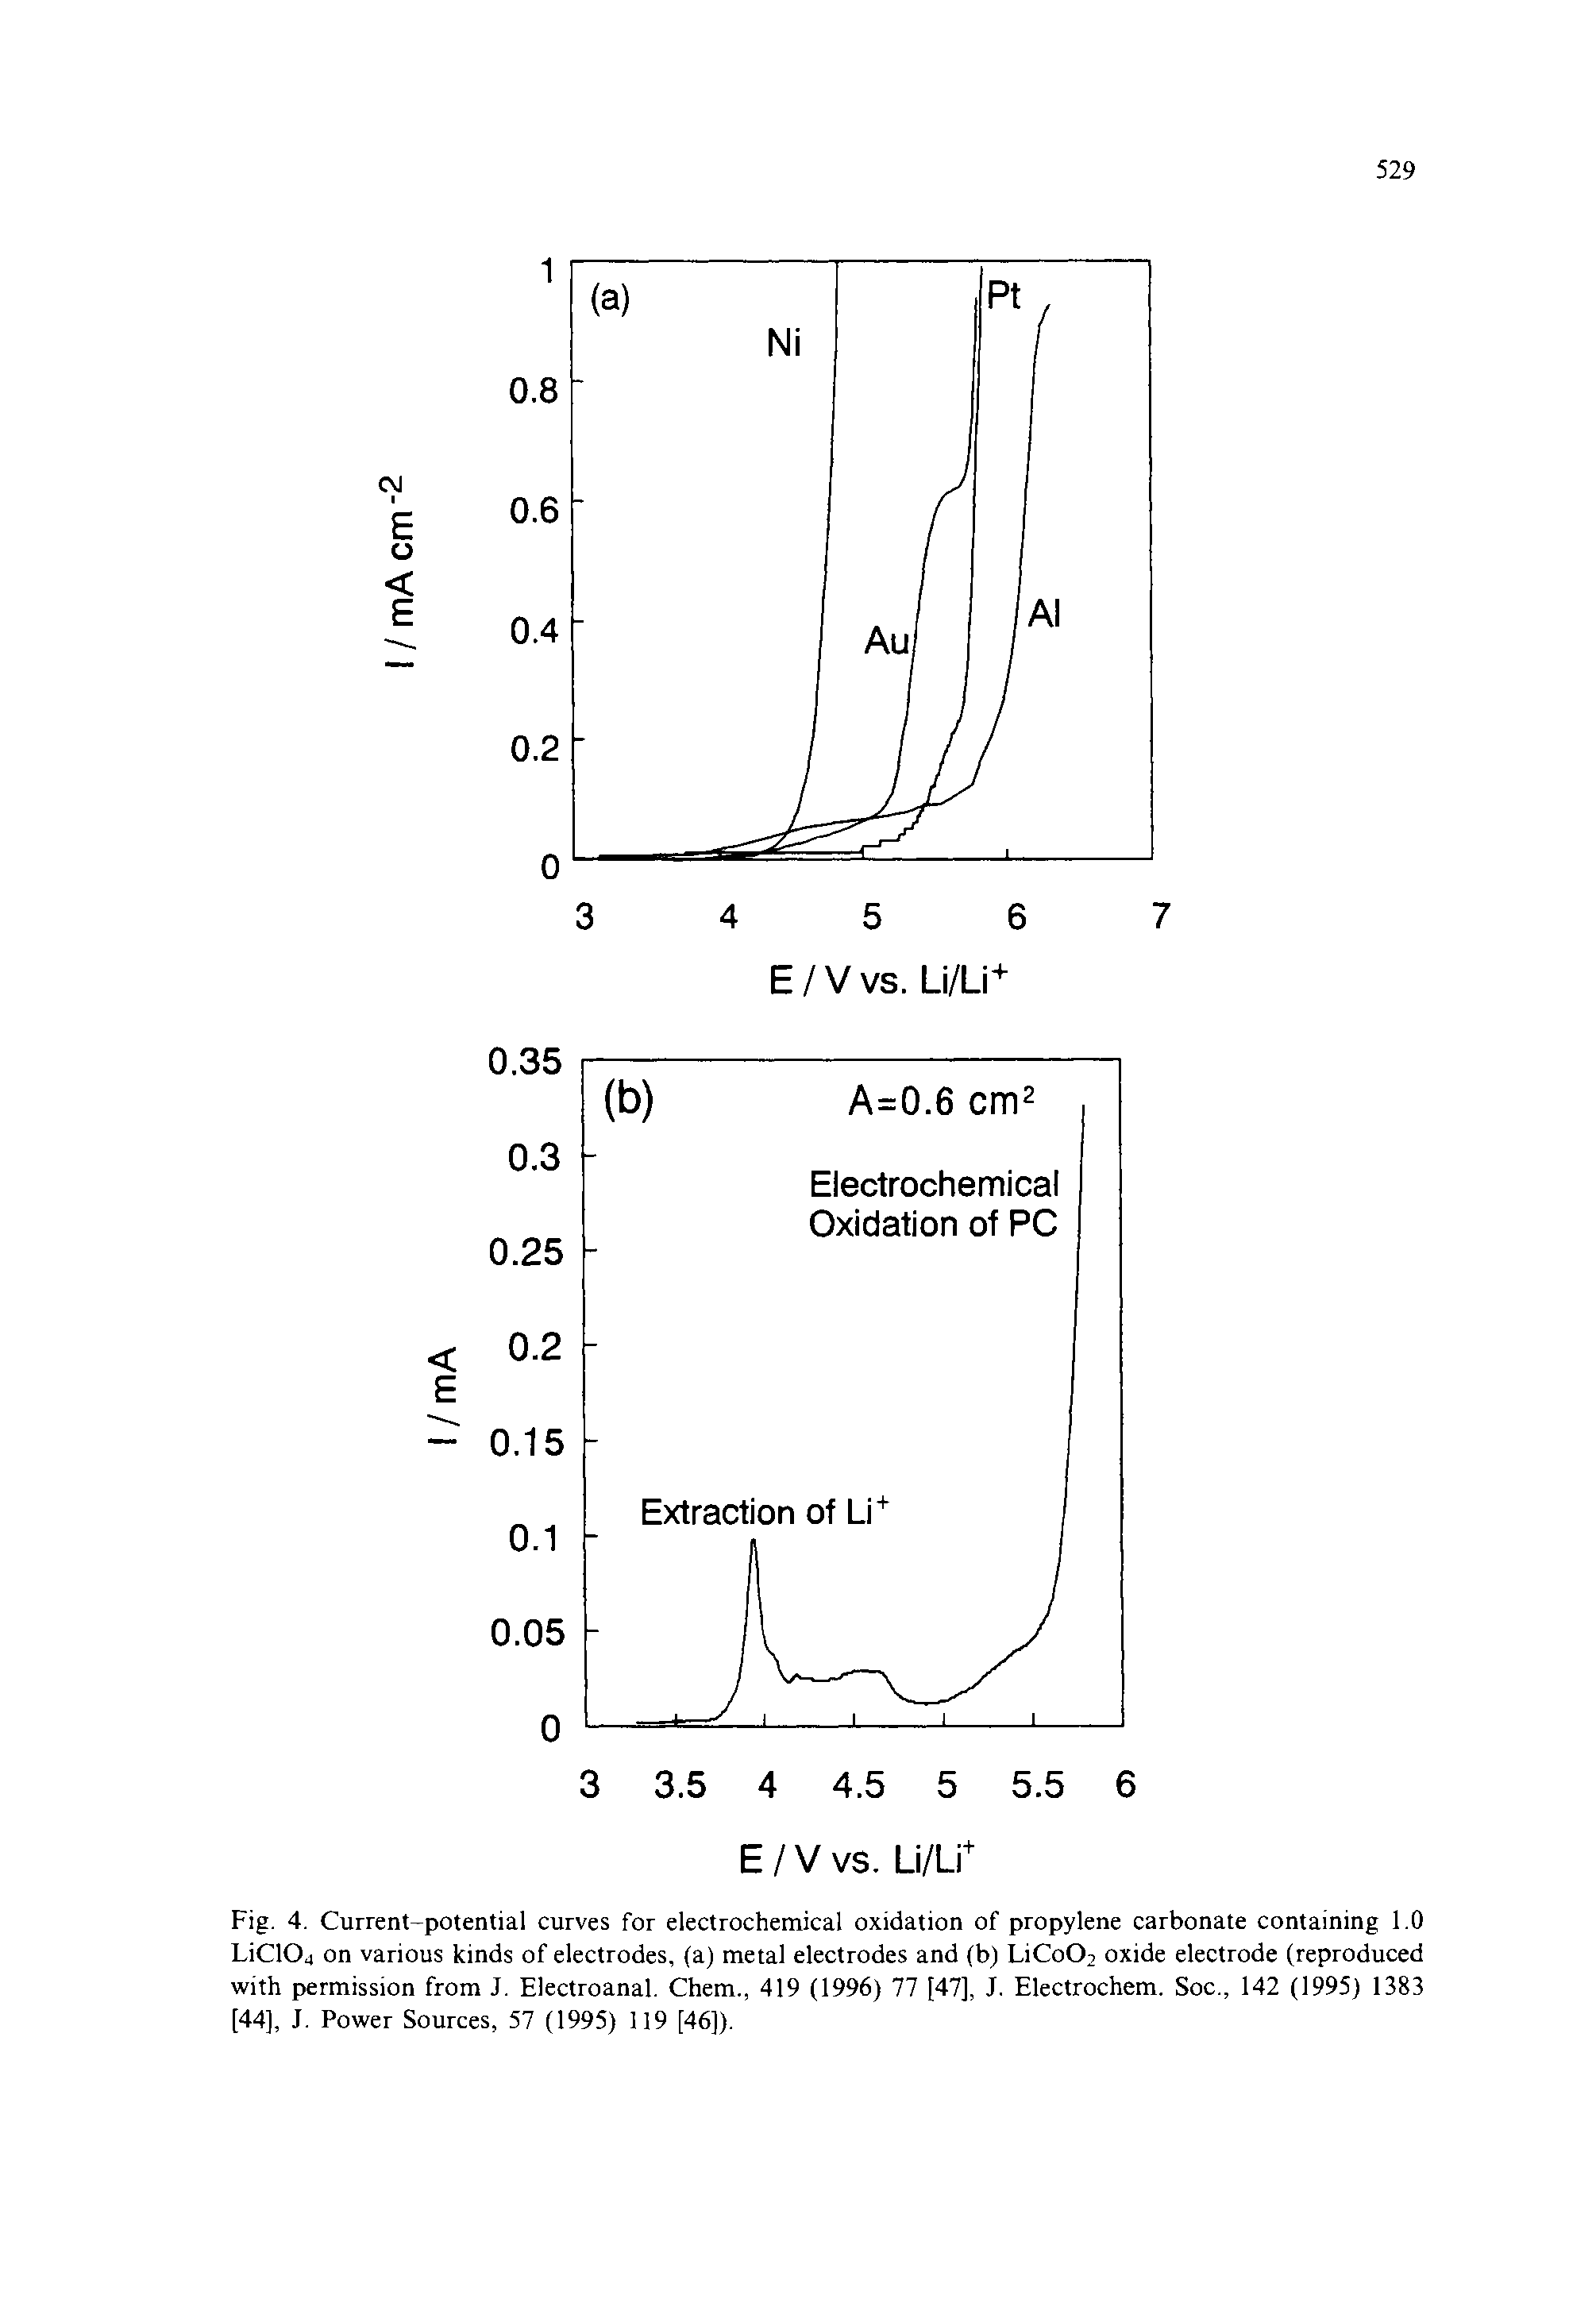 Fig. 4. Current-potential curves for electrochemical oxidation of propylene carbonate containing 1.0 LiClOj on various kinds of electrodes, (a) metal electrodes and (b) LiCo02 oxide electrode (reproduced with permission from J. Electroanal. Chem., 419 (1996) 77 [47], J. Electrochem. Soc., 142 (1995) 1383 [44], J. Power Sources, 57 (1995) 119 [46]).